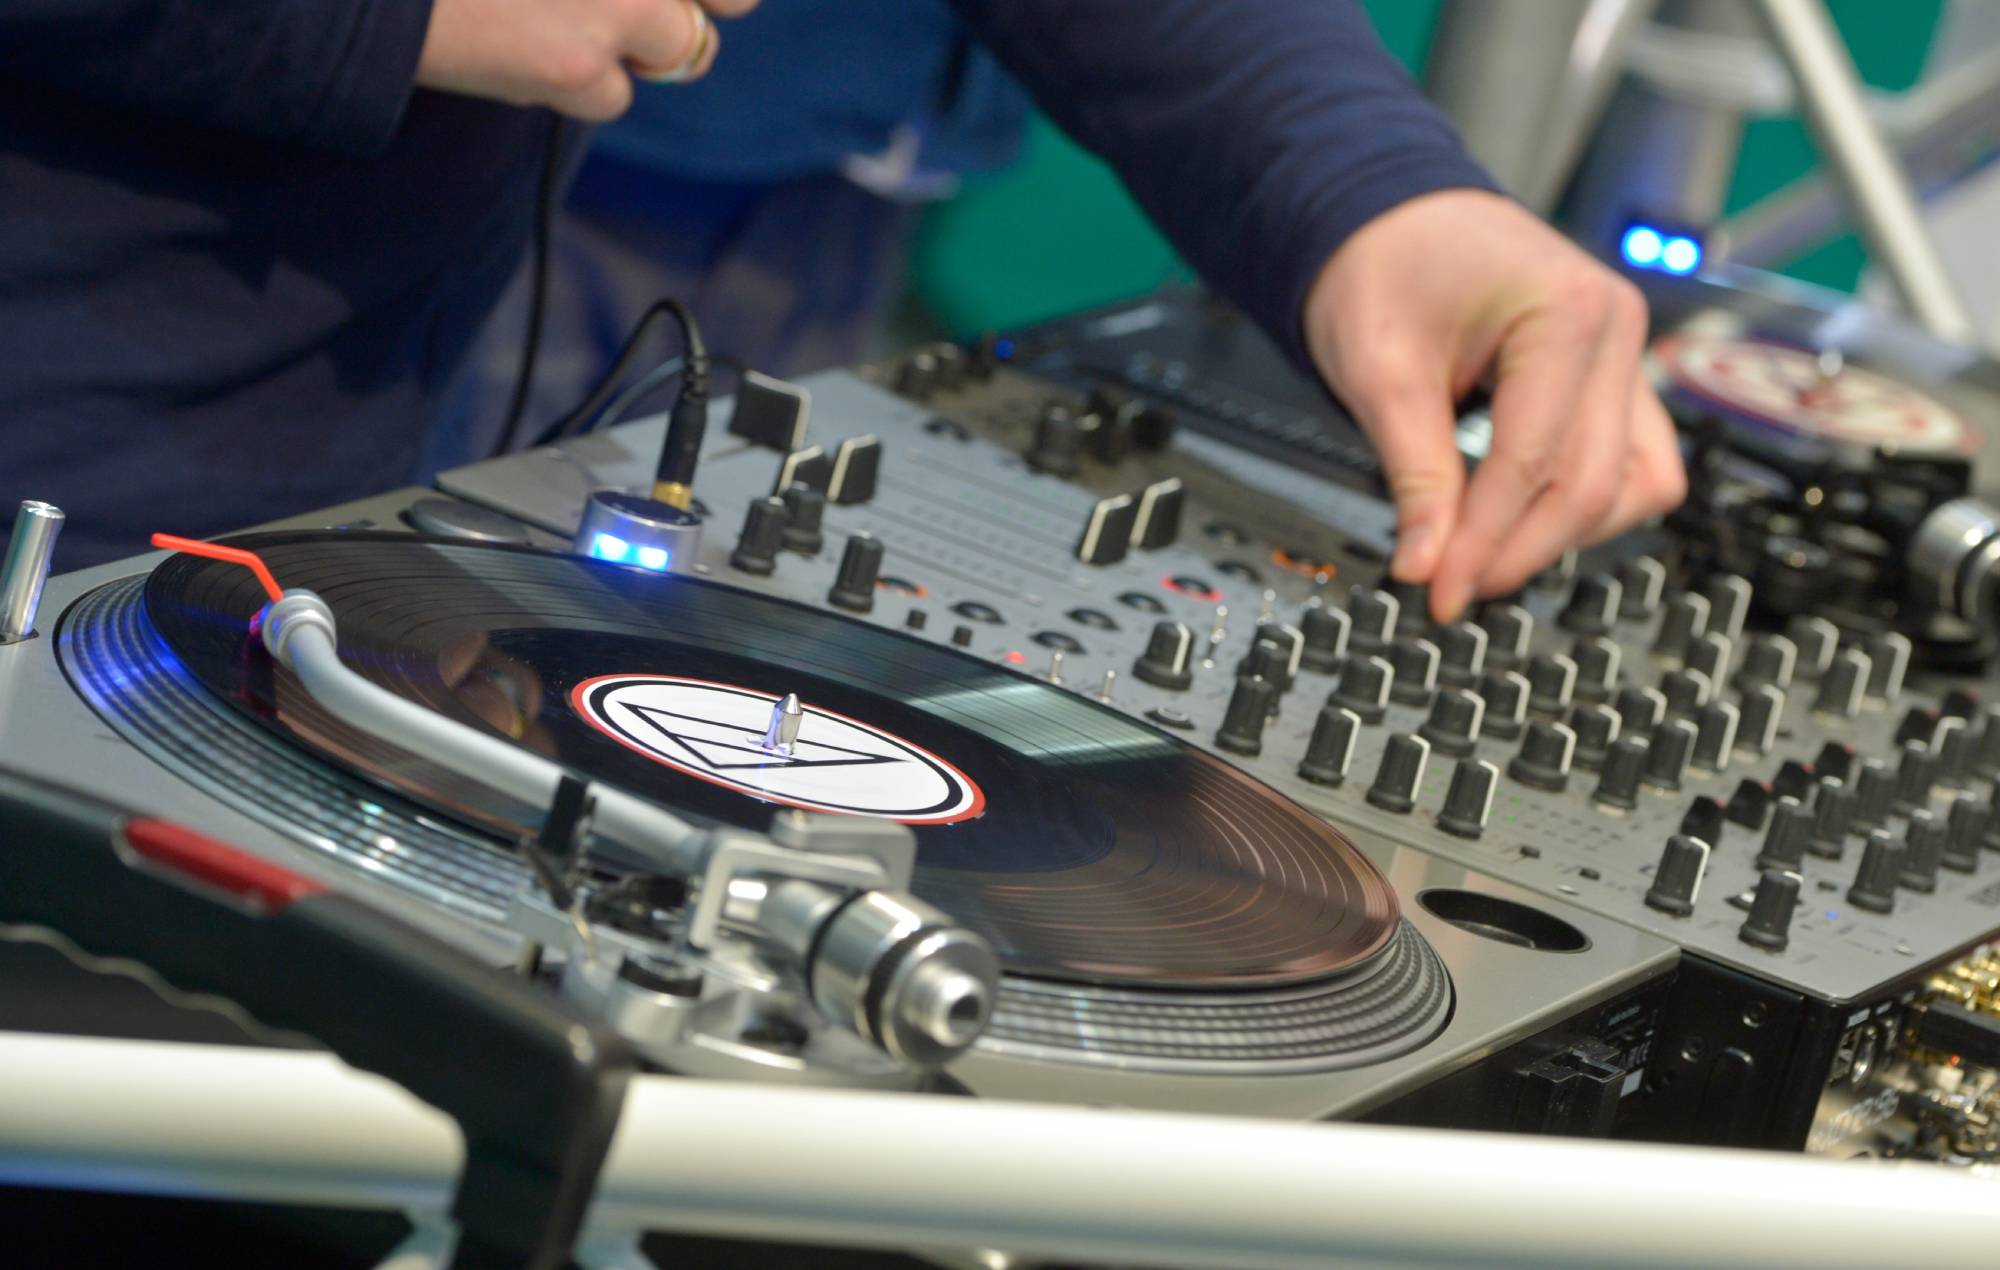 Man says learning how to DJ helped 'reawaken my brain' after injury